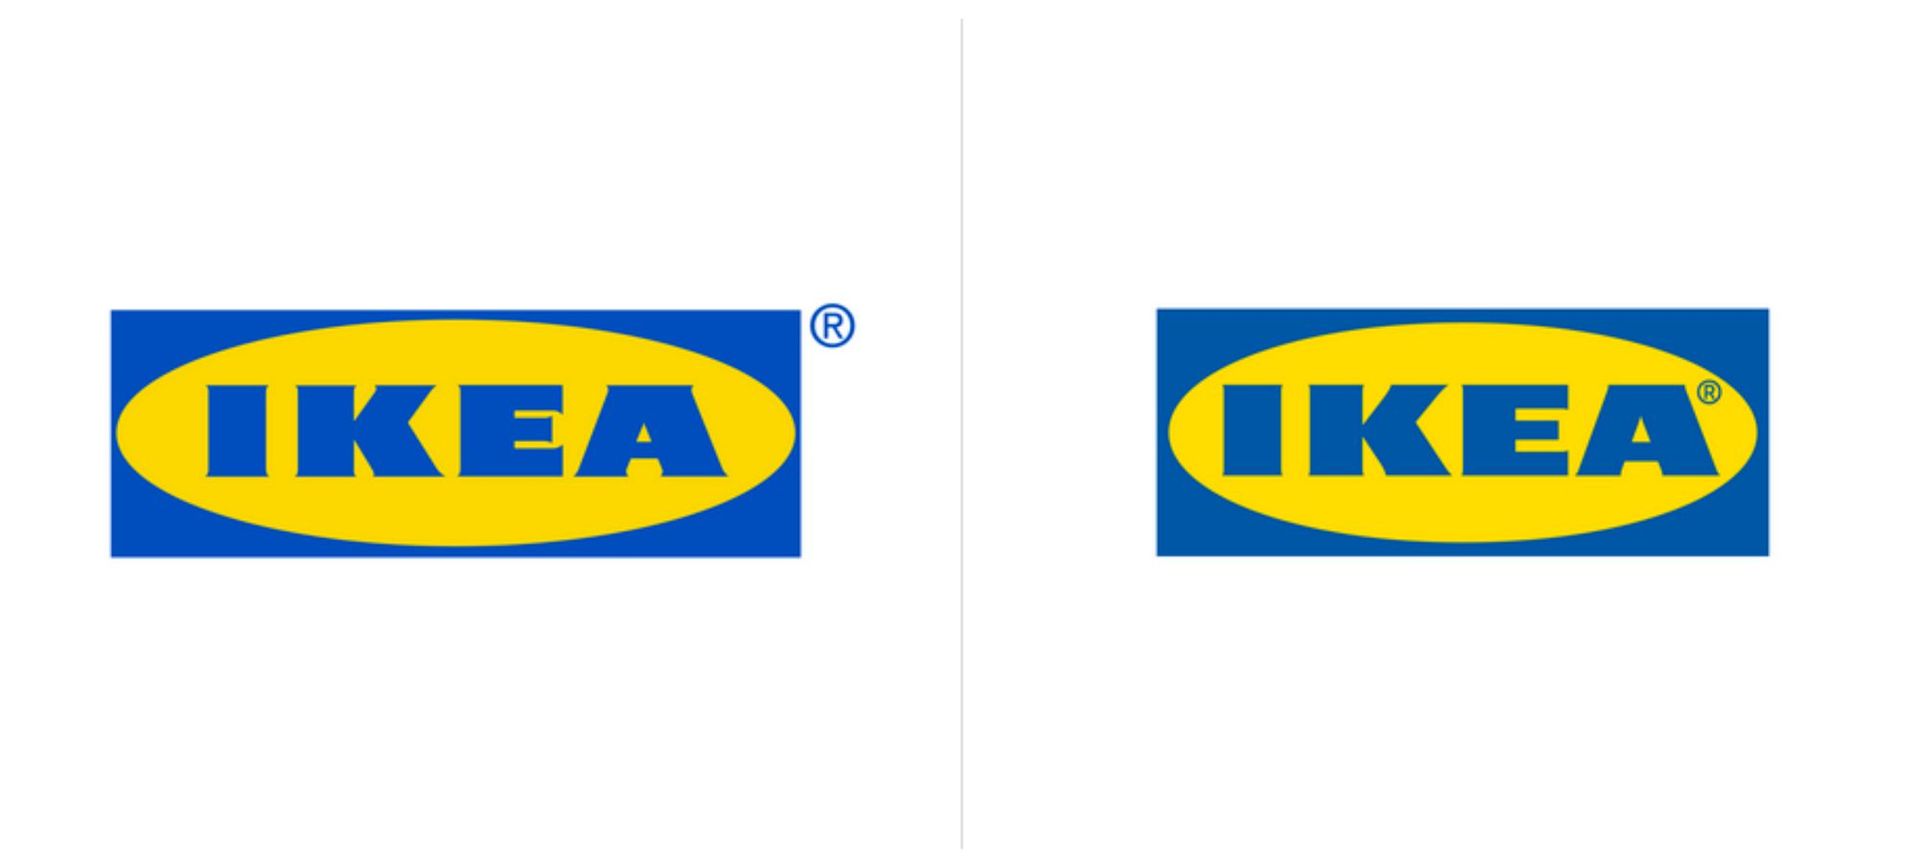 There Are Fewer Dramatic Rebrands These Days The Difference Logos